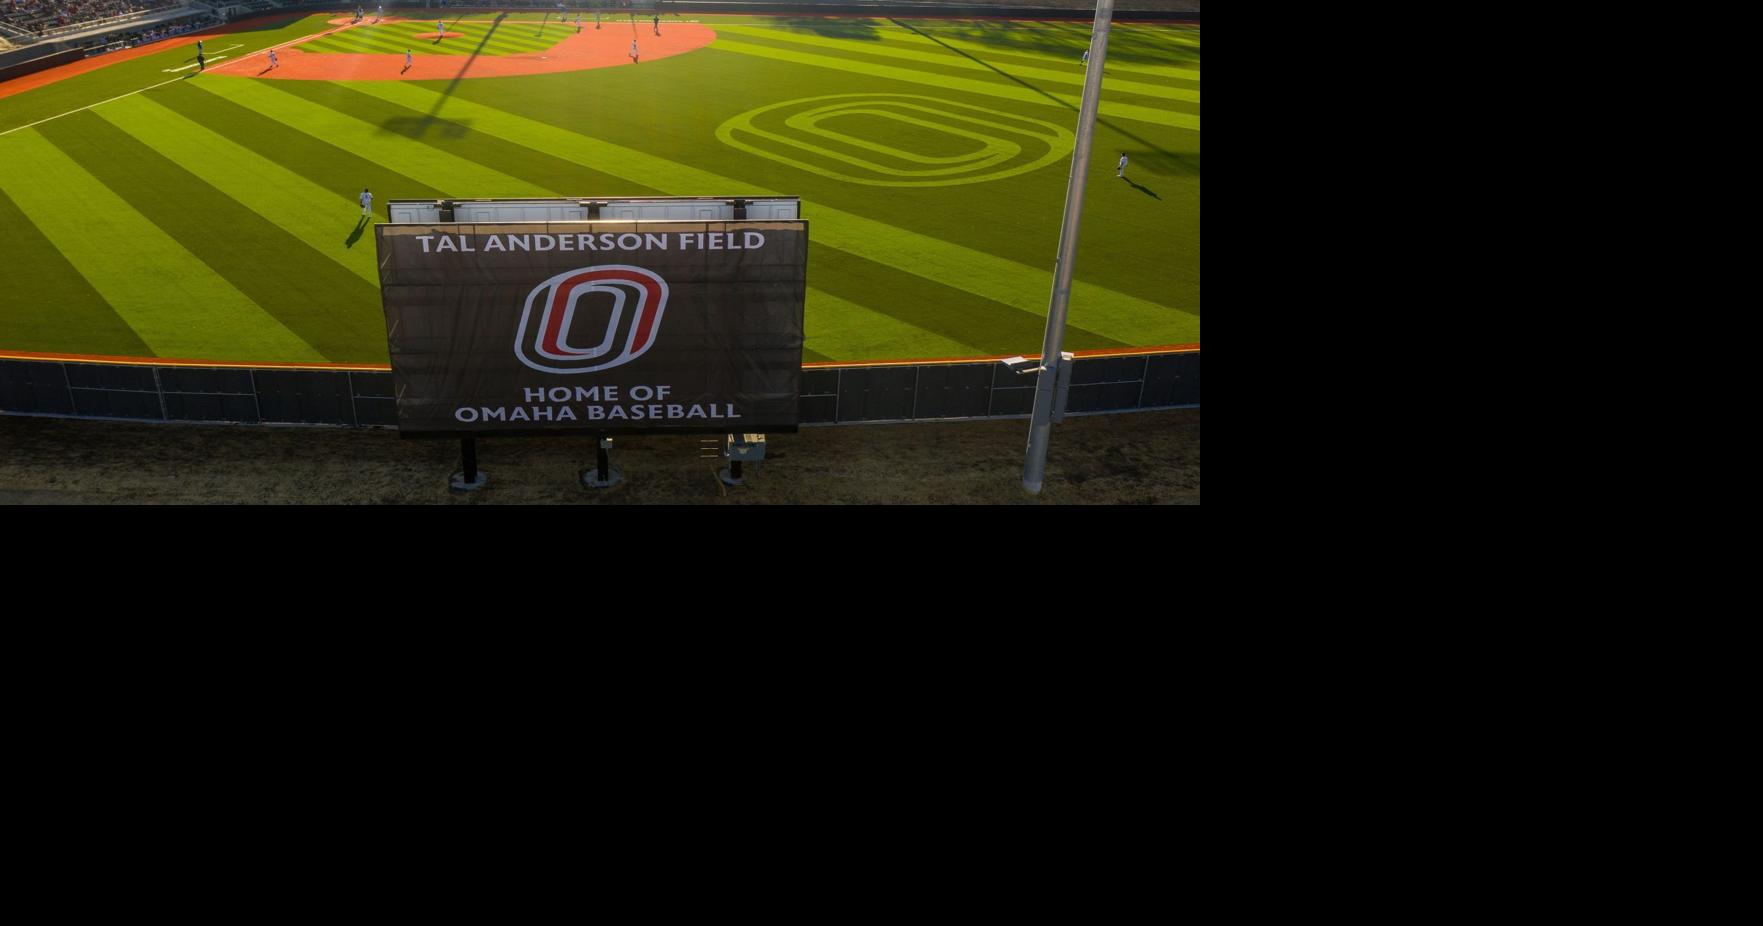 Abraham Lincoln baseball to host quad at UNO’s Tal Anderson Field July 2